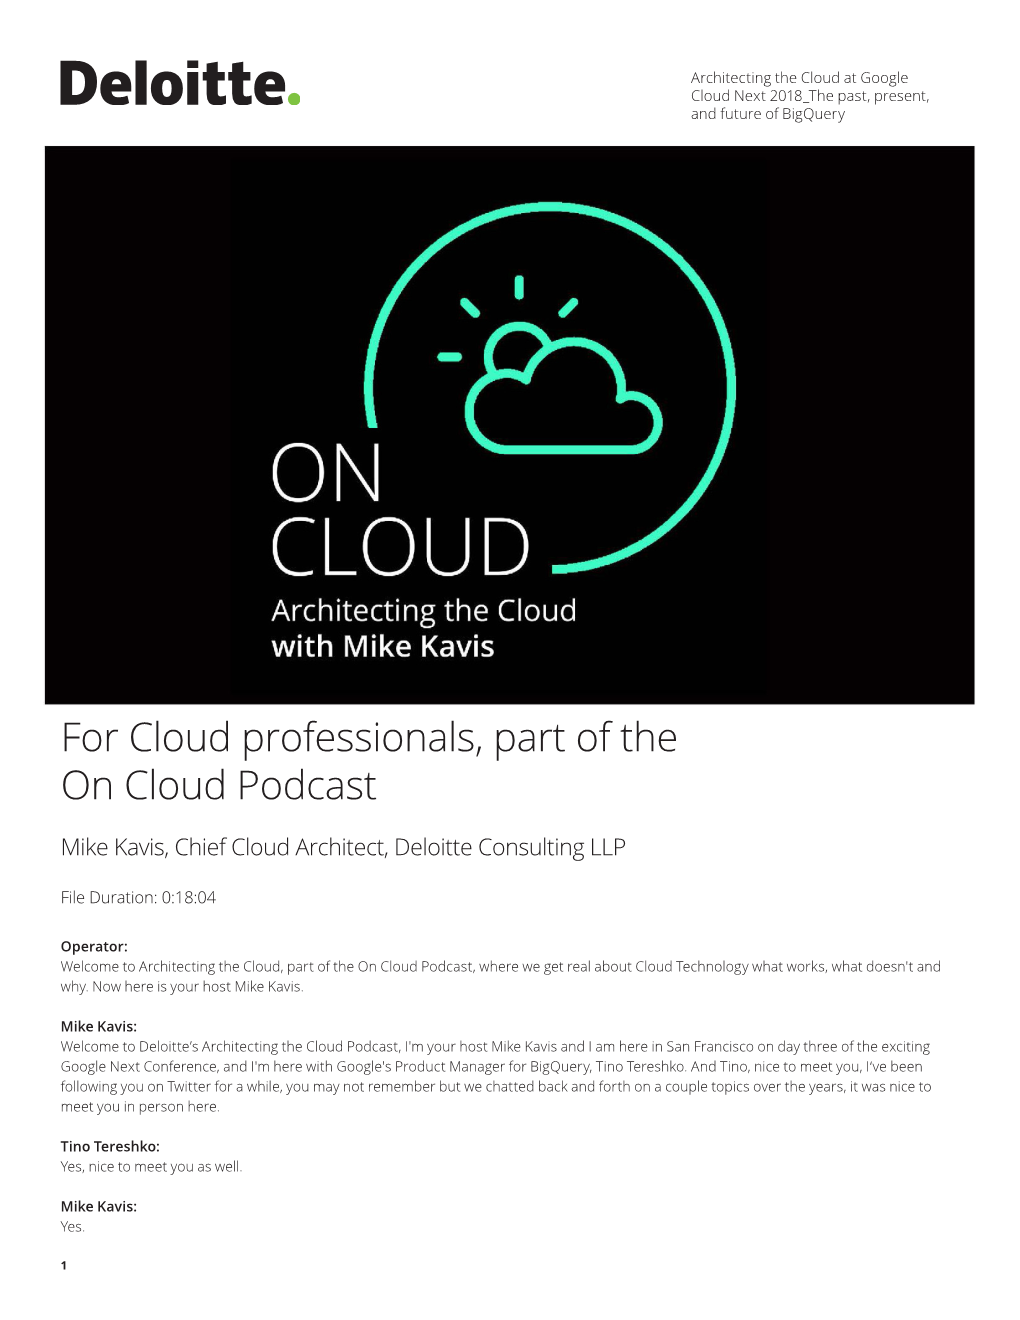 For Cloud Professionals, Part of the on Cloud Podcast